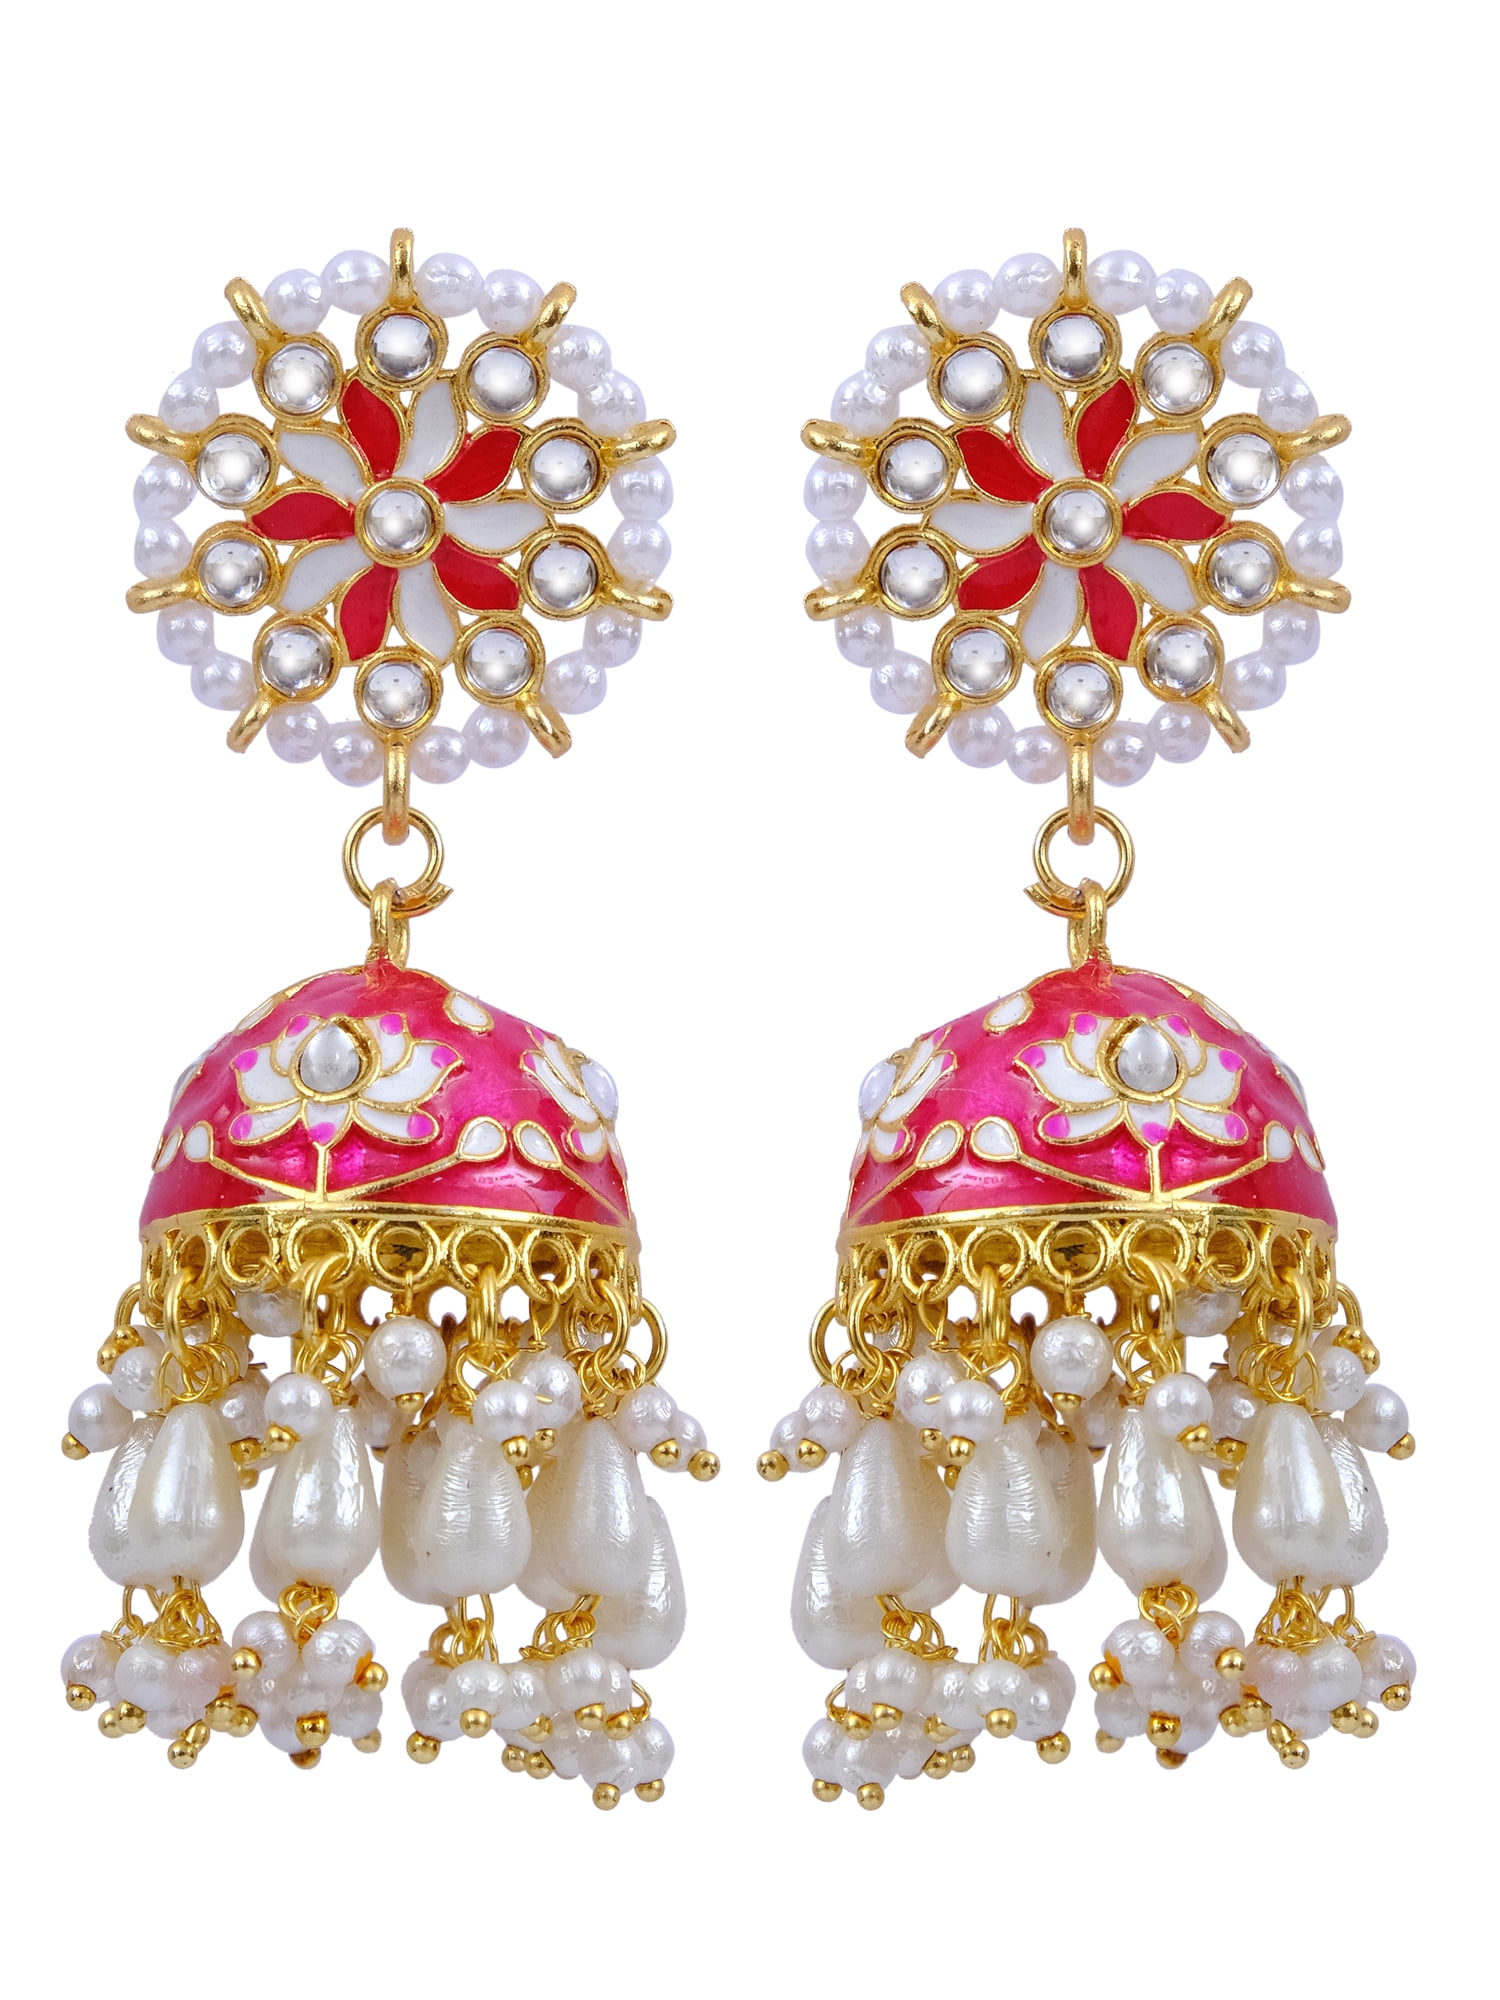 Flipkart.com - Buy CRUNCHY FASHION Crunchy Fashion Gold-Plated Heritage  Pearl Dome Jhumka Earrings RAE2082 Alloy Jhumki Earring Online at Best  Prices in India